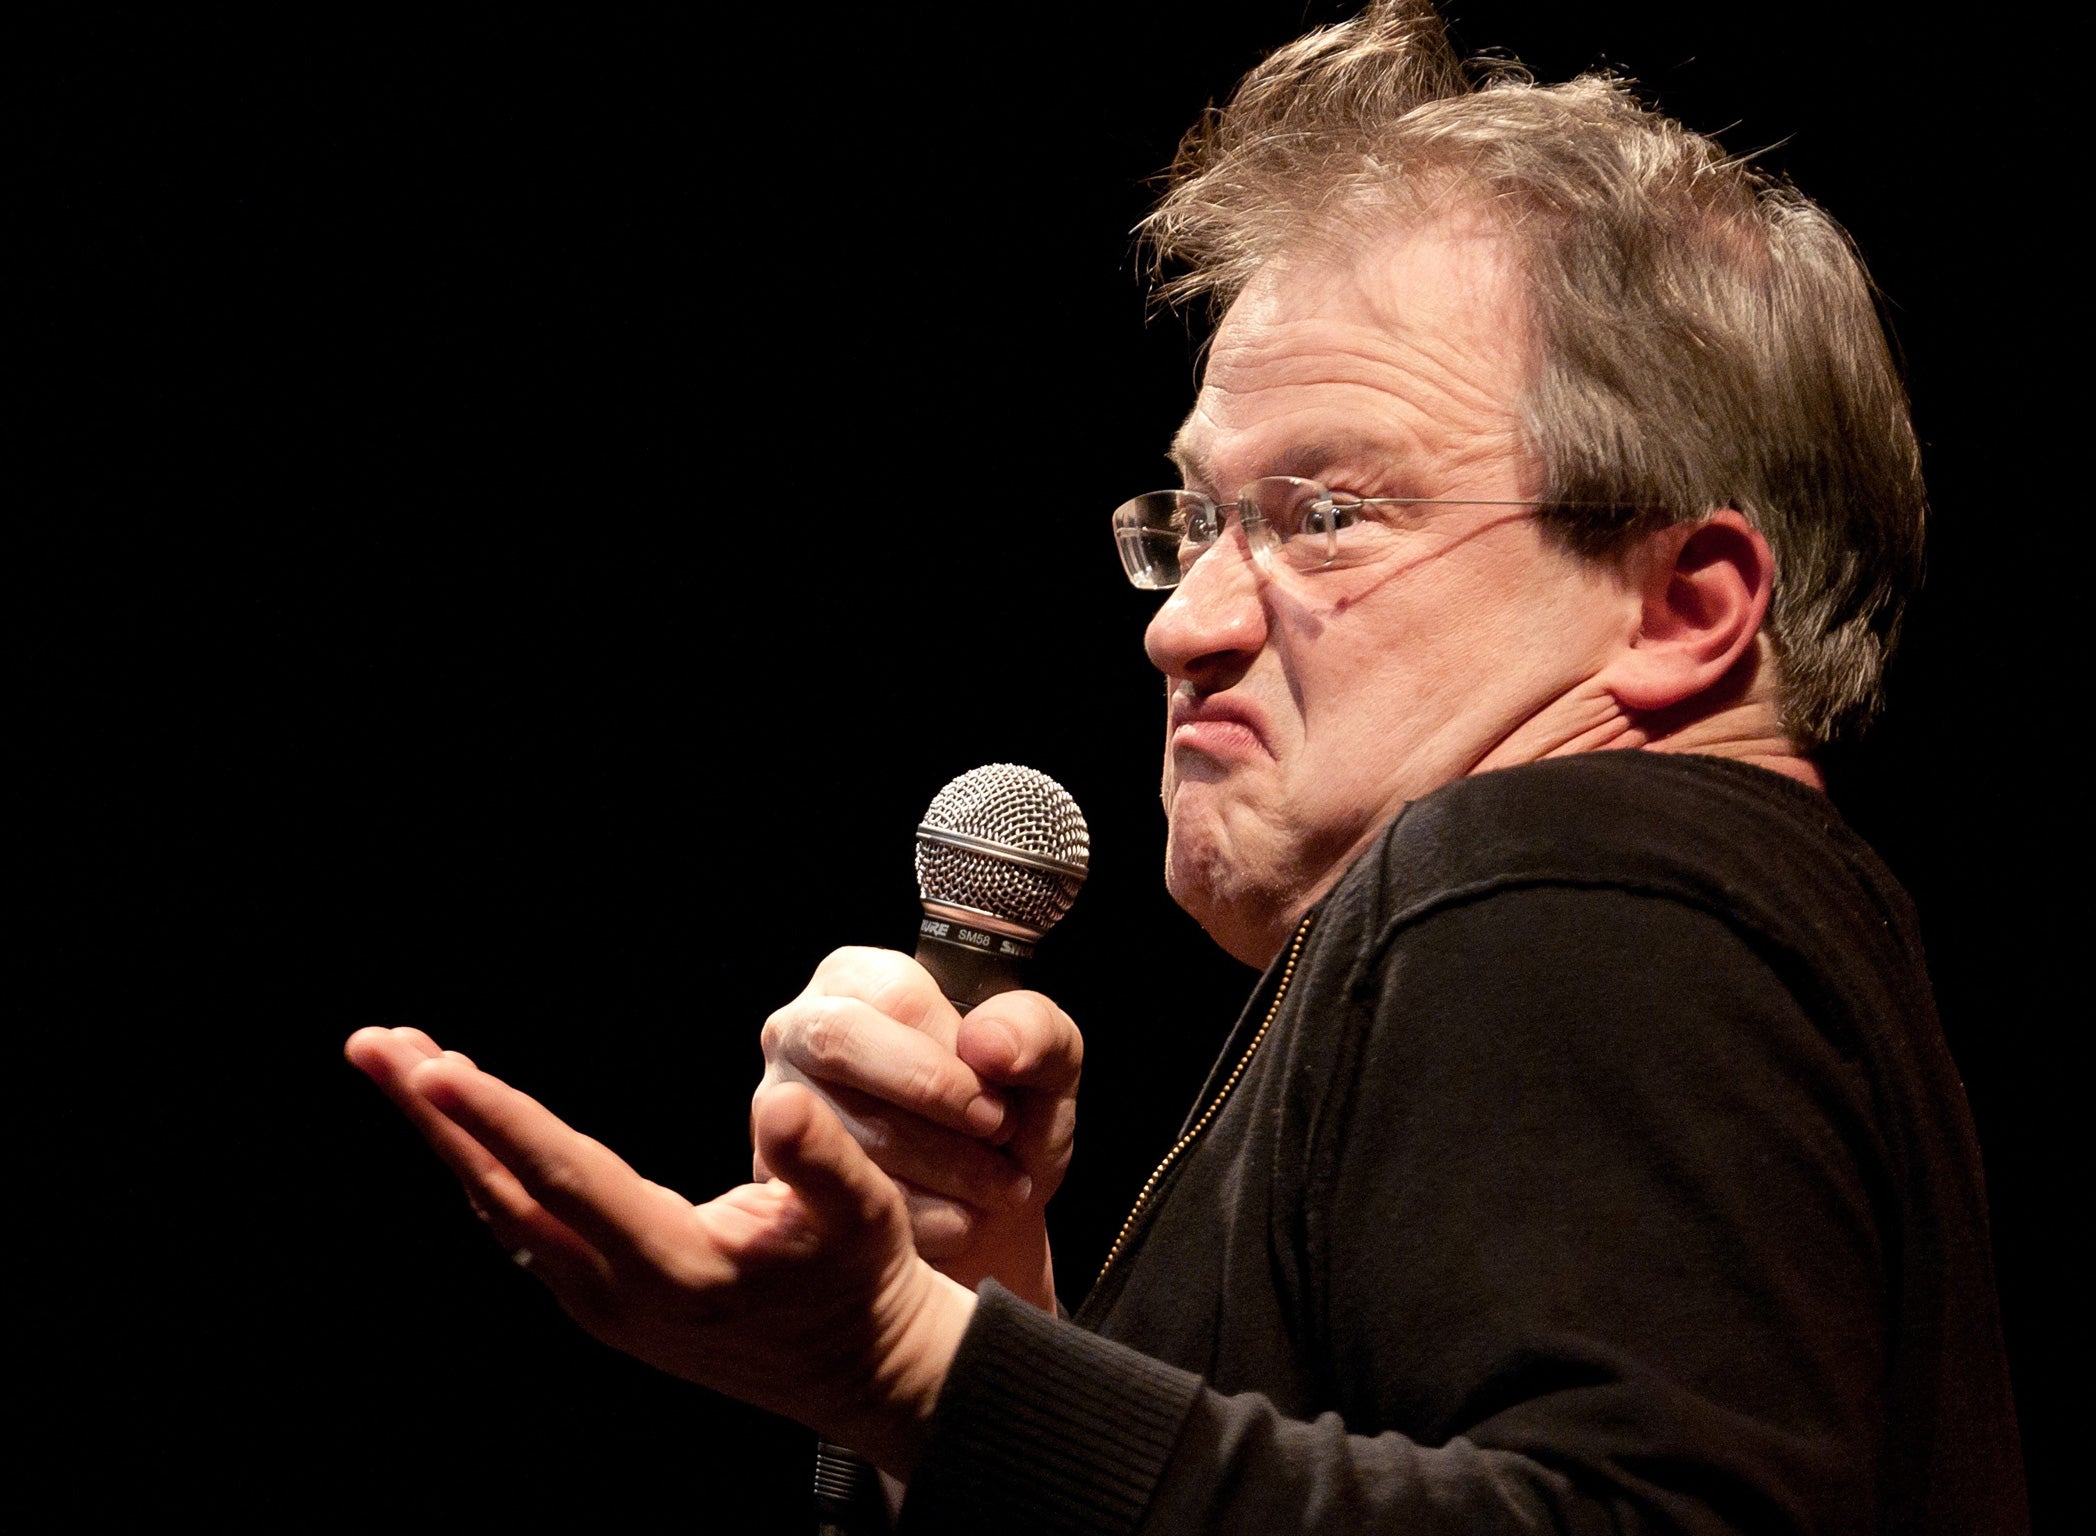 Oh come all ye faithless: Robin Ince entertains with his Godless celebration of Christmas